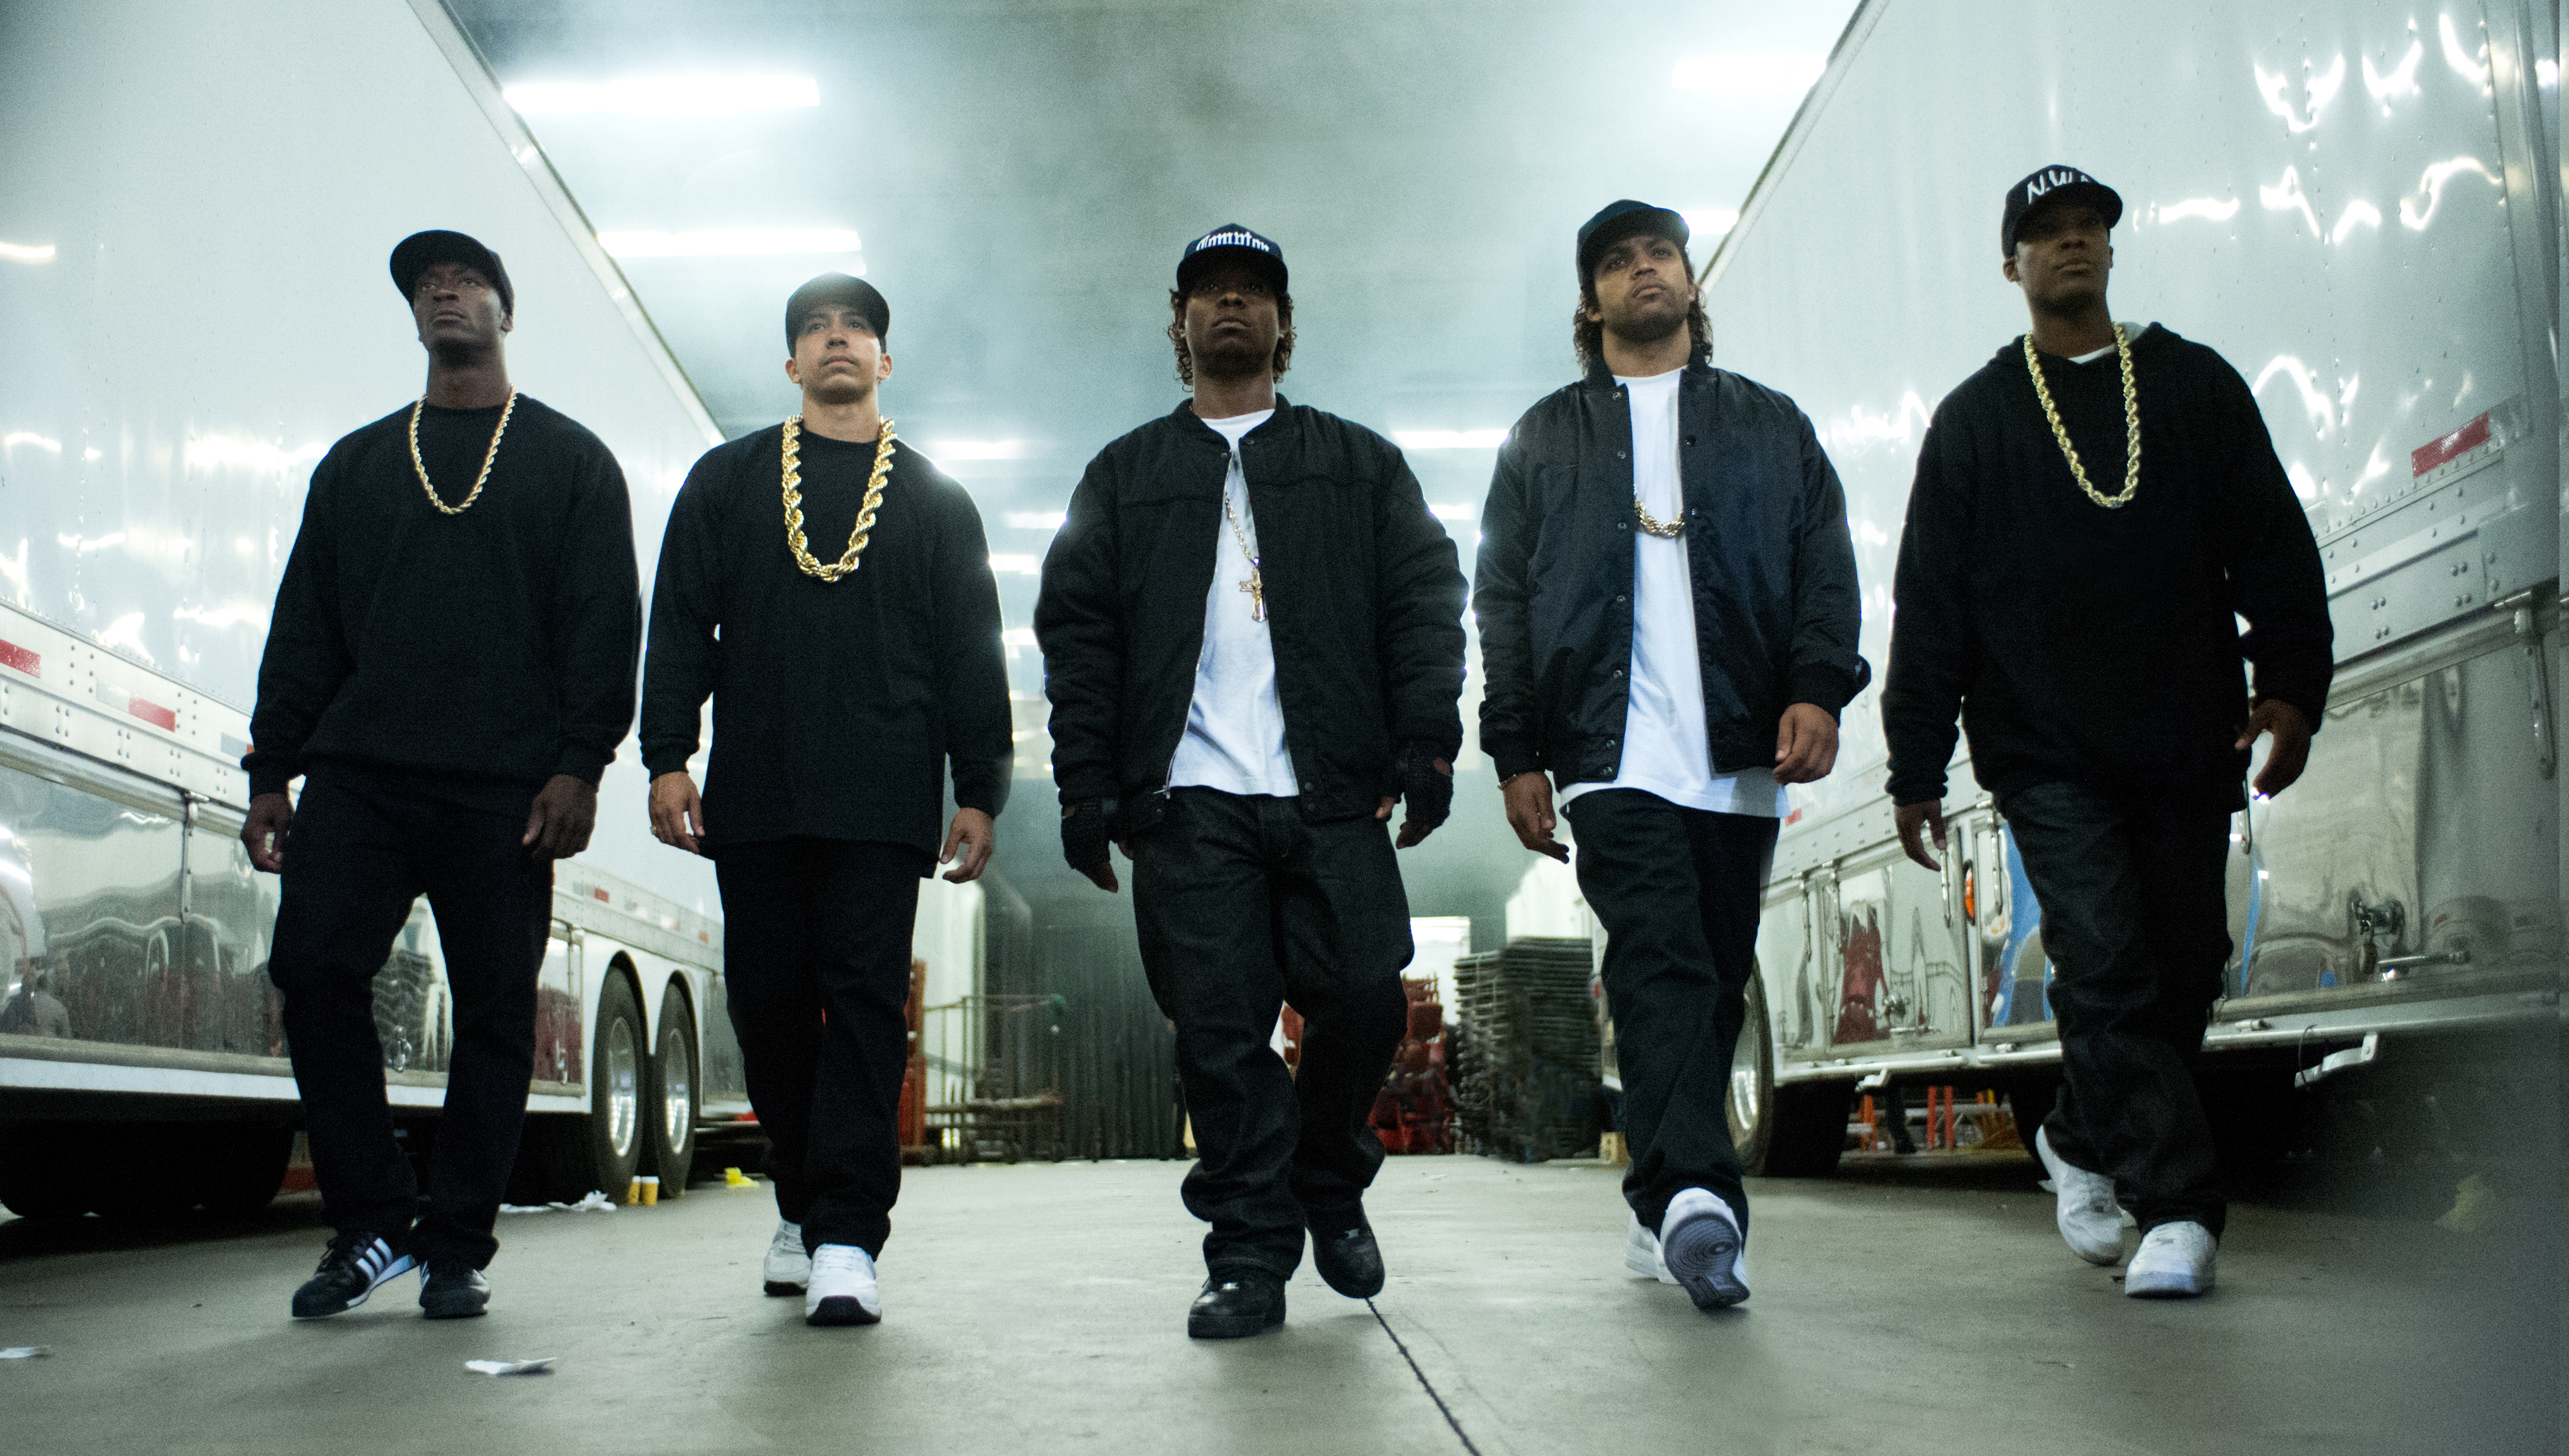 Universal Pictures' Straight Outta Compton